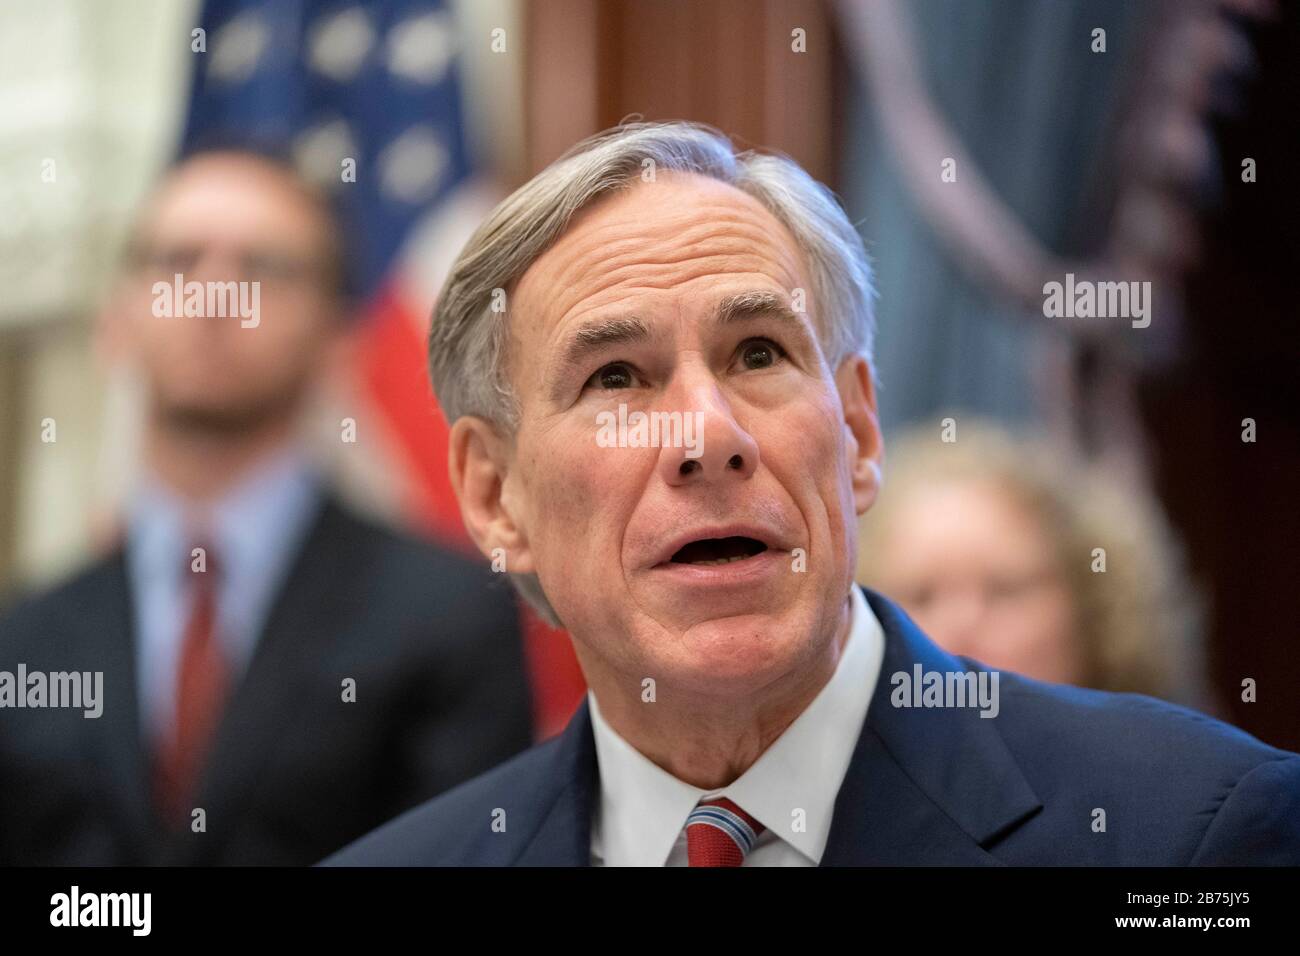 Texas, USA. 13th March, 2020. Texas Gov. Greg Abbott declares a "state of disaster" in the state during a press conference at his Capitol office in Austin as Texas braces for an onslaught of coronavirus cases.Later in the day, Pres. Donald Trump declared a national emergency while the United States continues to battle spread of the virus. Credit: Bob Daemmrich/Alamy Live News Stock Photo